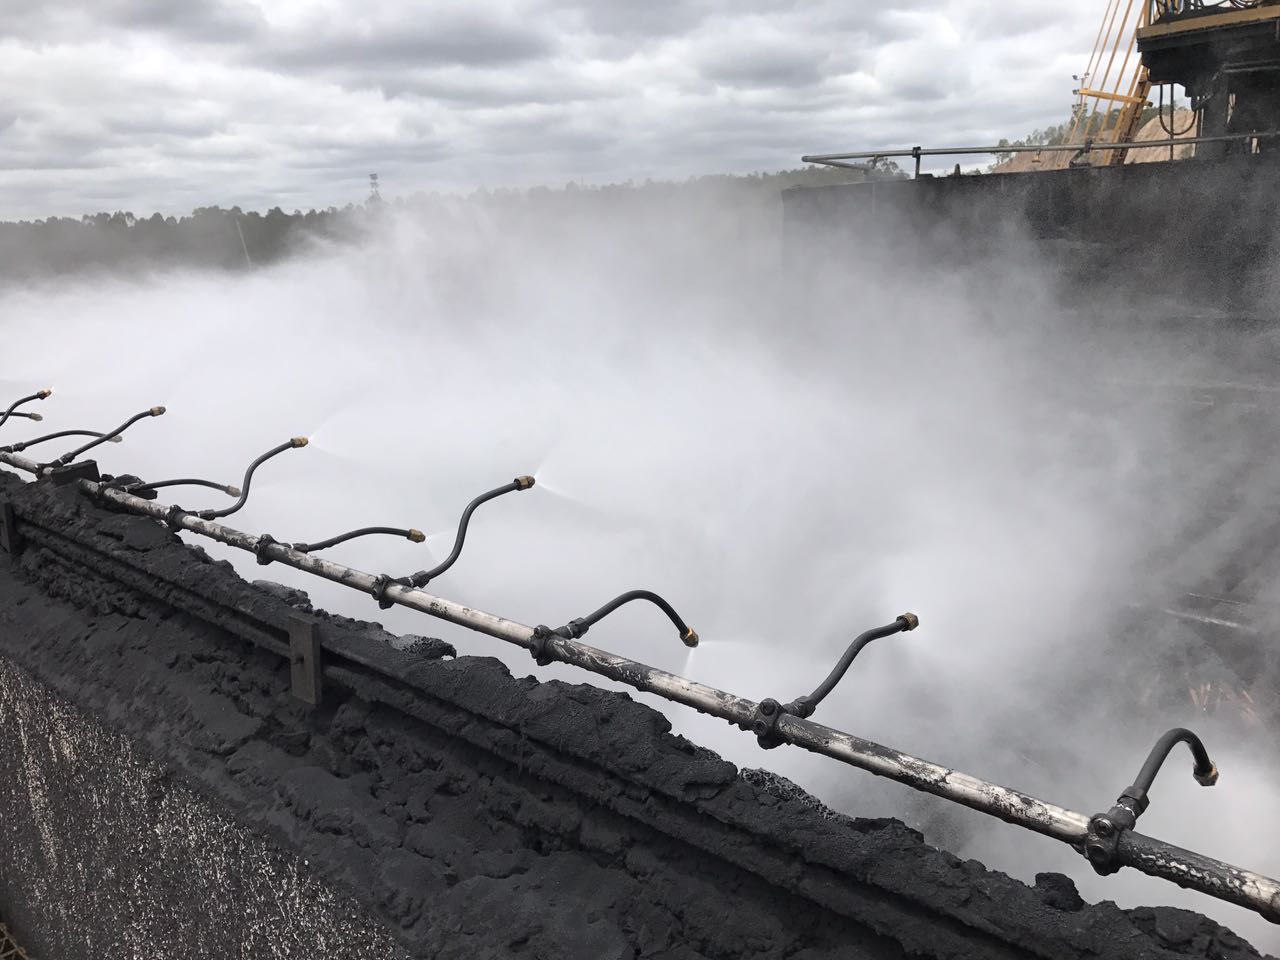 Custom Dust Suppression System in action